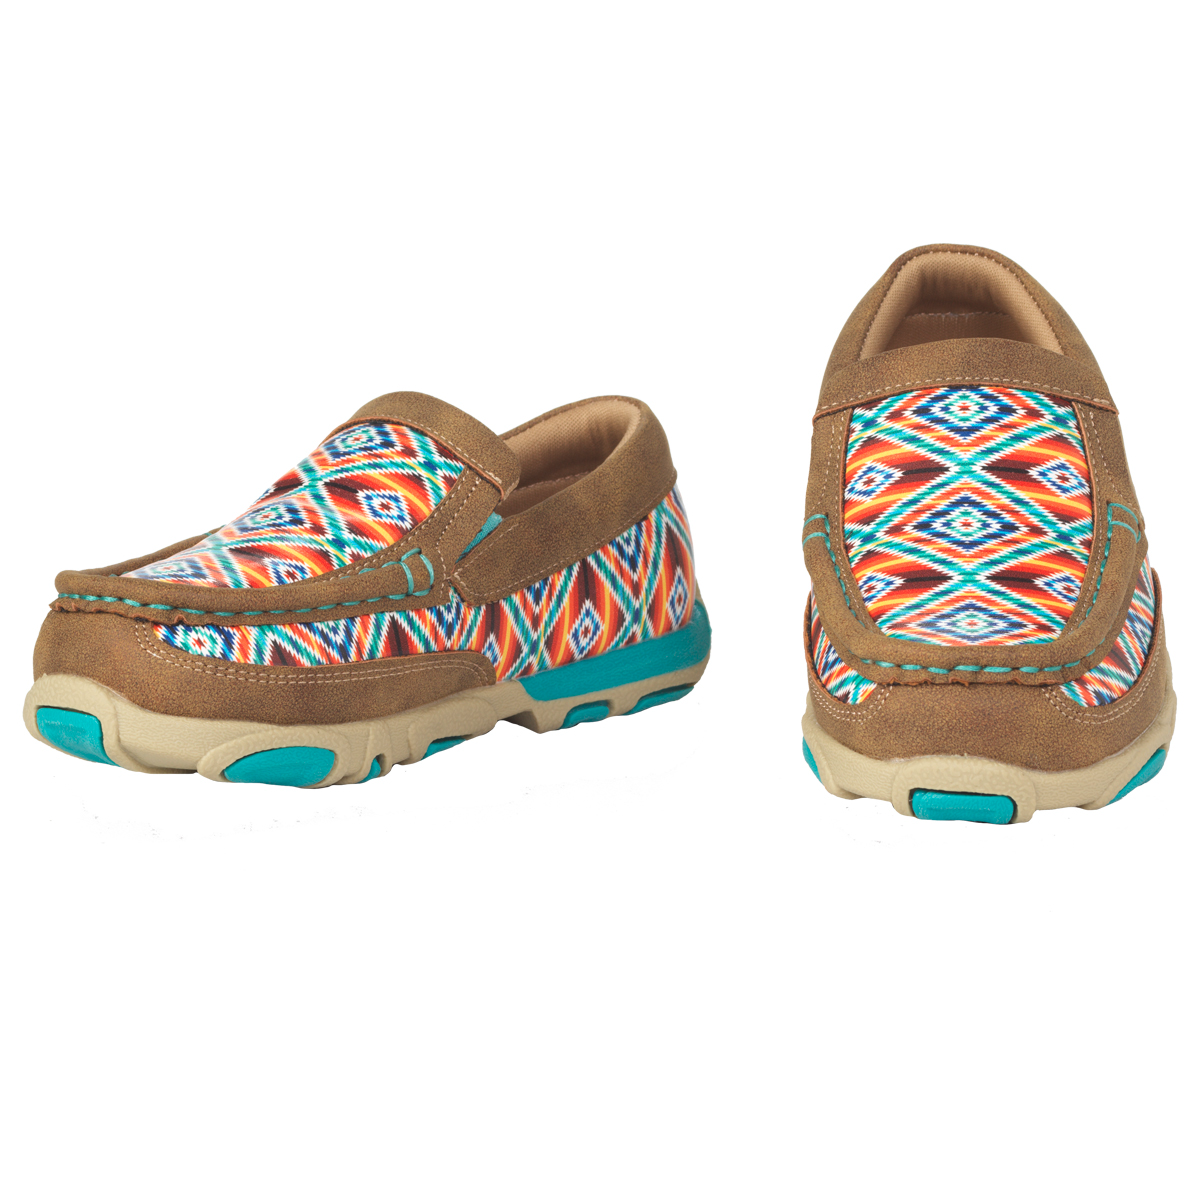 Twister Brynlee Style Childrens Moccasin Shoe - Brown